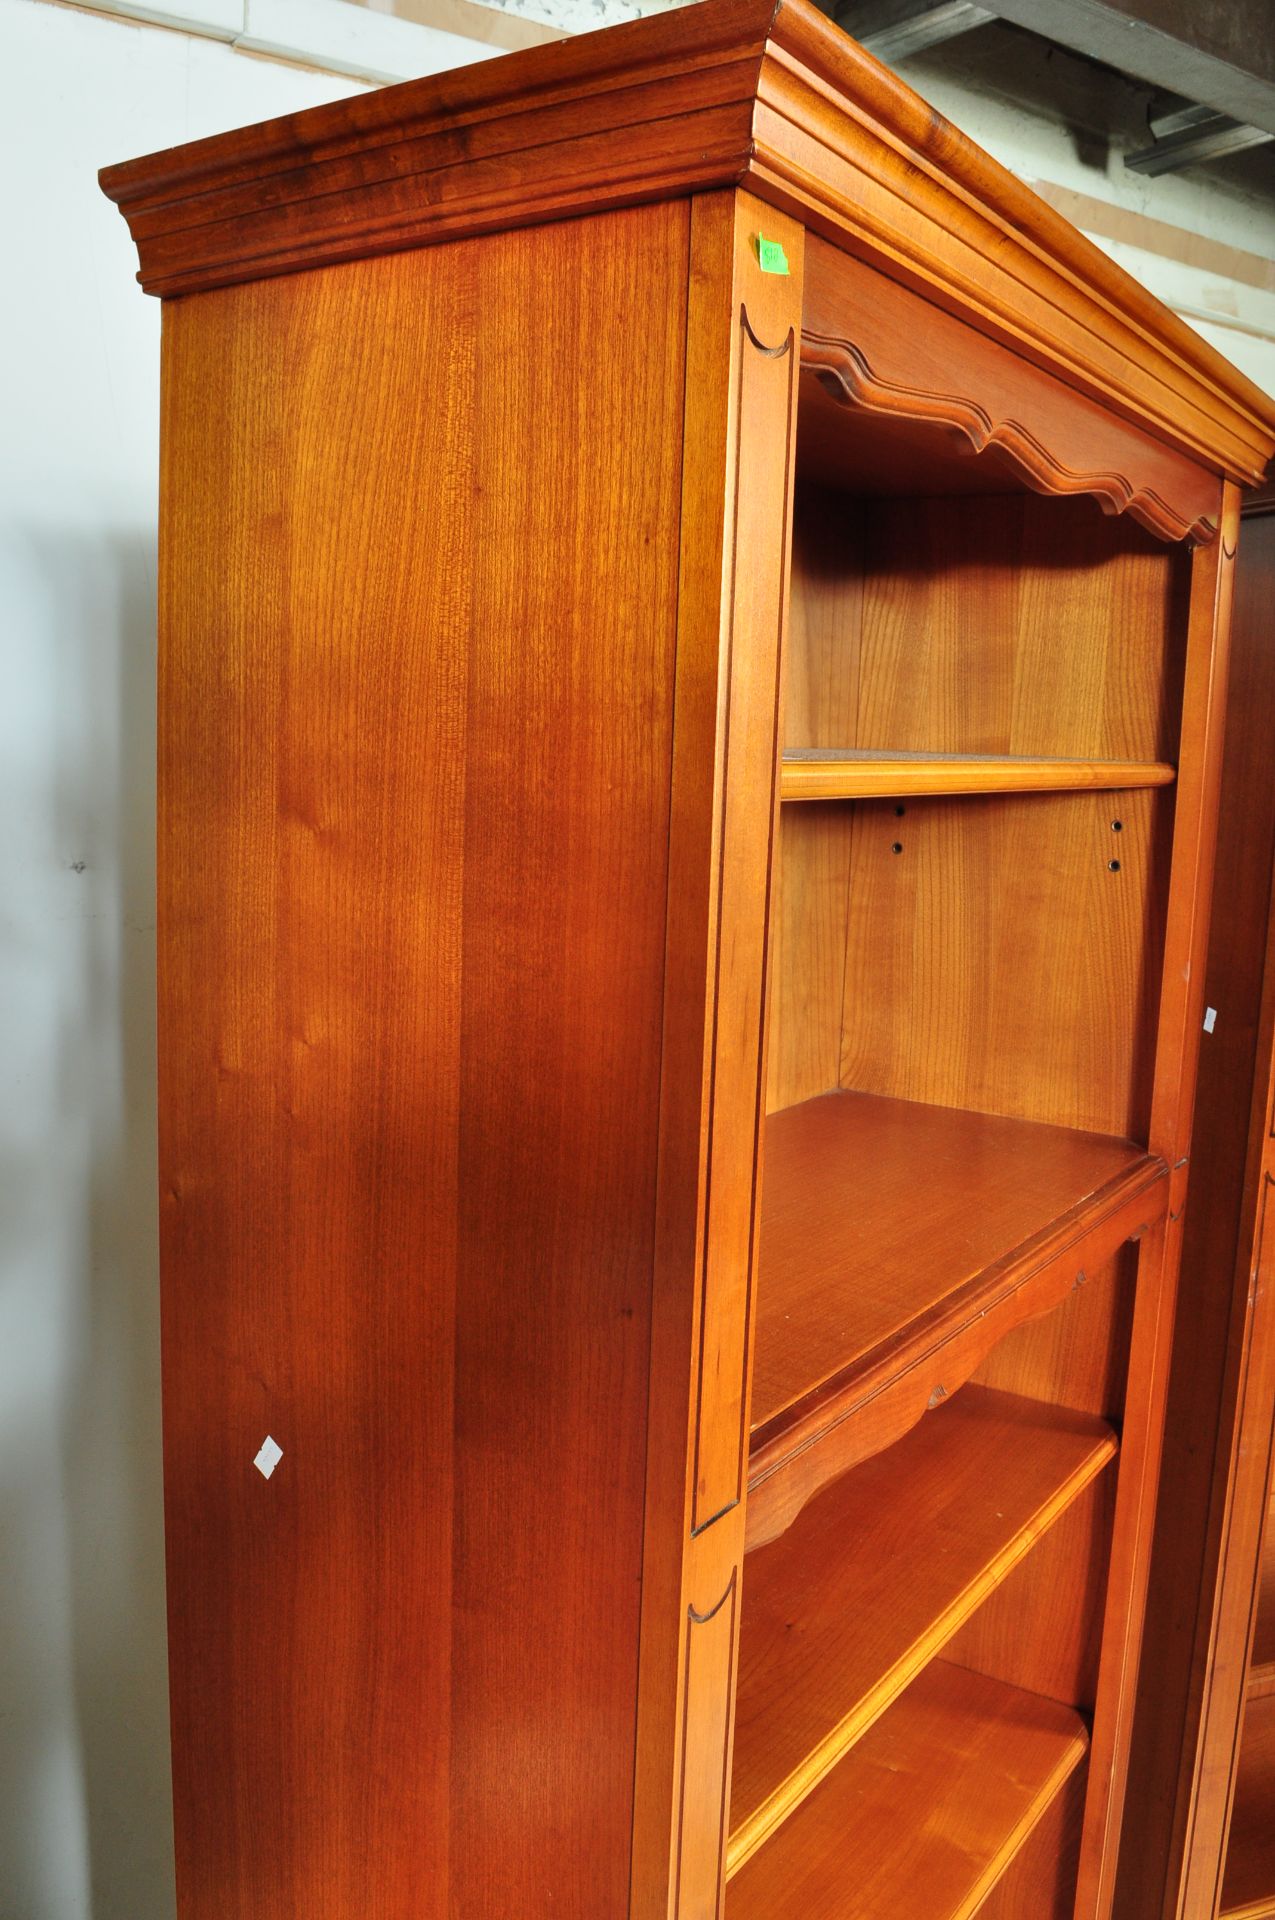 PAIR OF VINTAGE MAHOGANY OPEN FACE BOOKCASES - Image 4 of 4